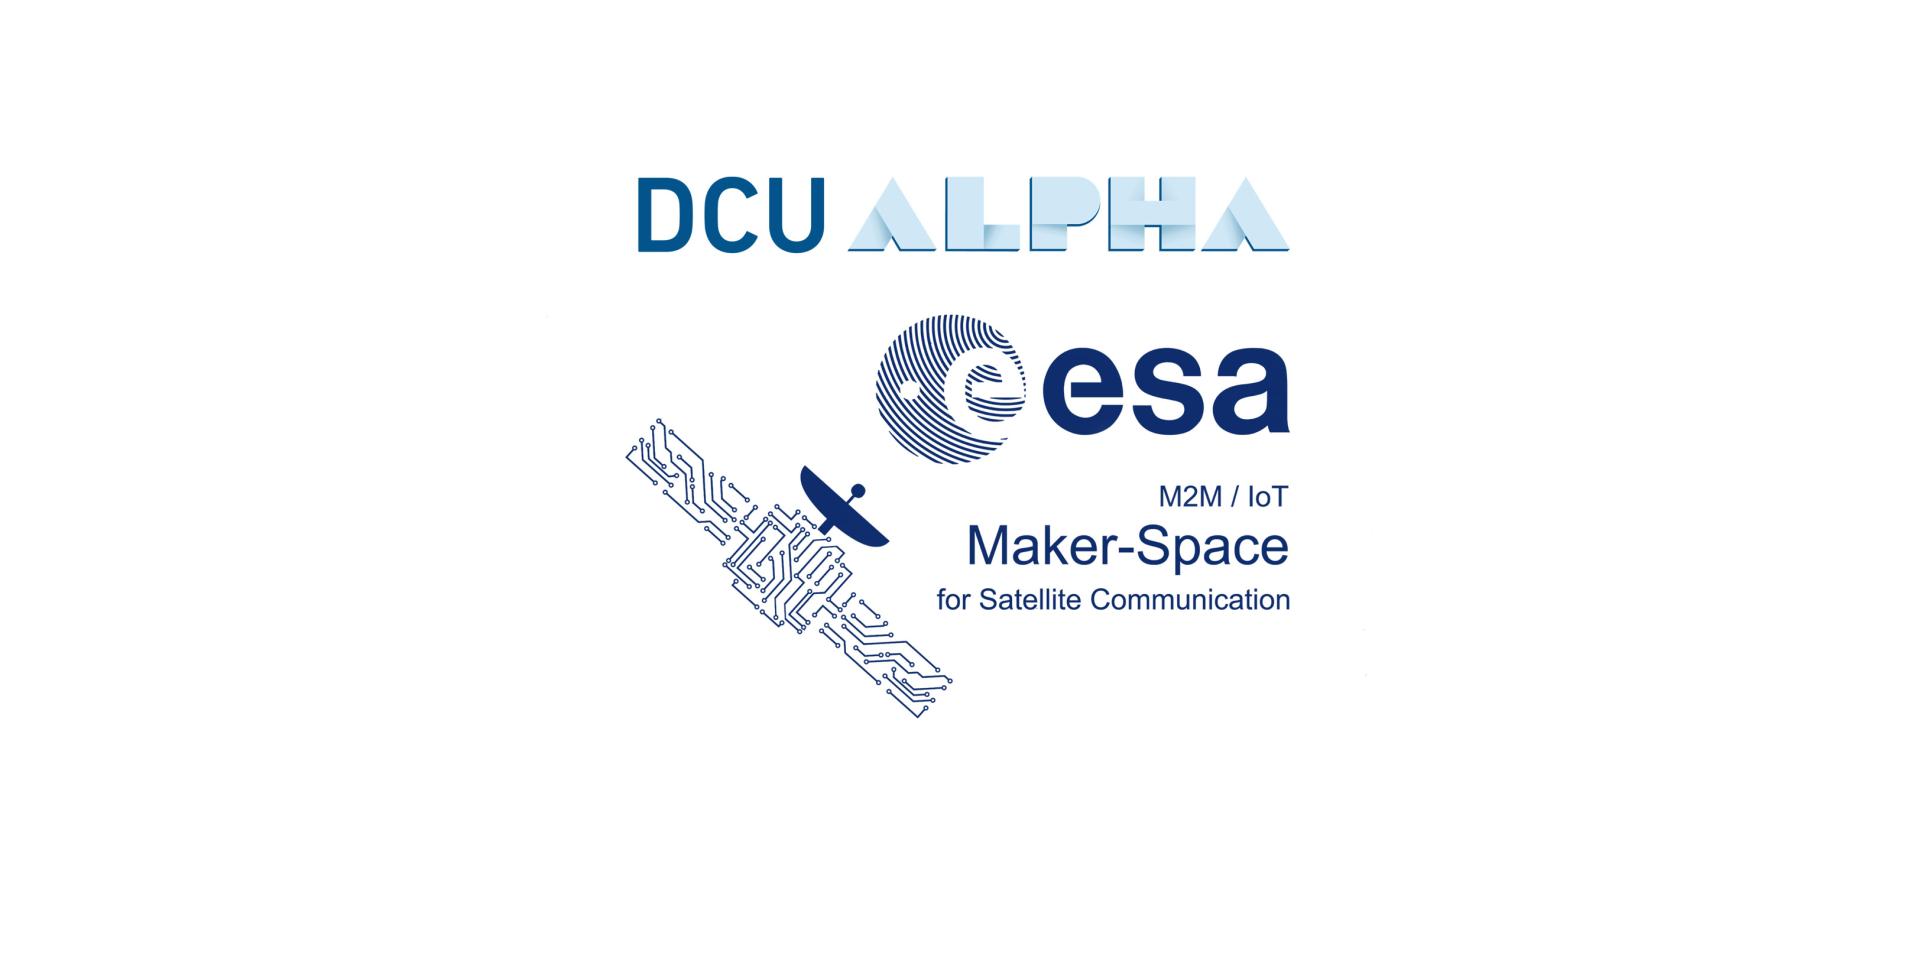 M2M / IoT Maker-Space for Satellite Communications